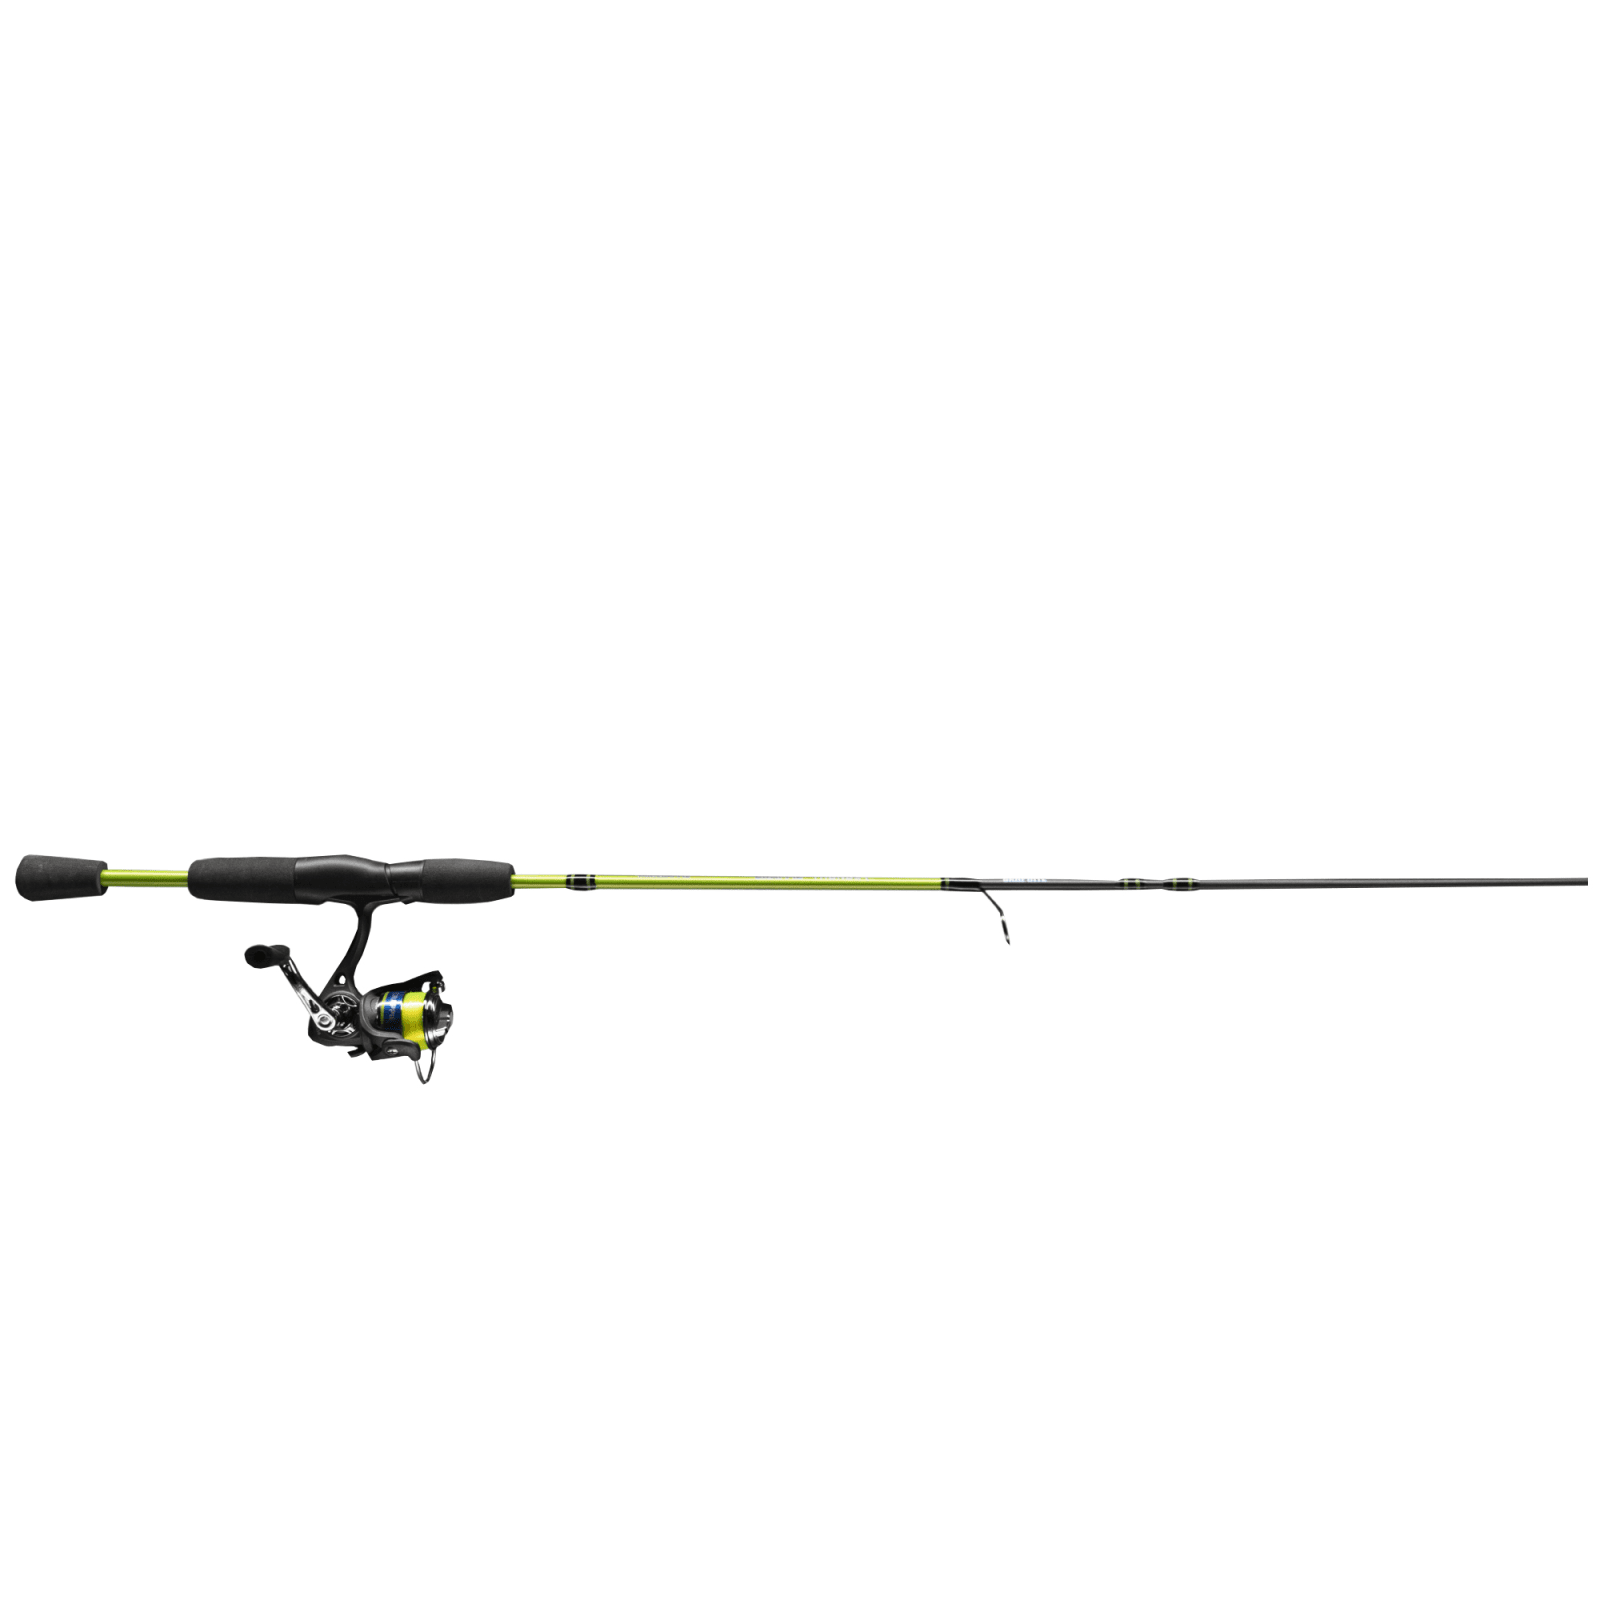 Crappie Thunder Rod 75 Size Spin Reel - 2 Pc. by Lew's at Fleet Farm